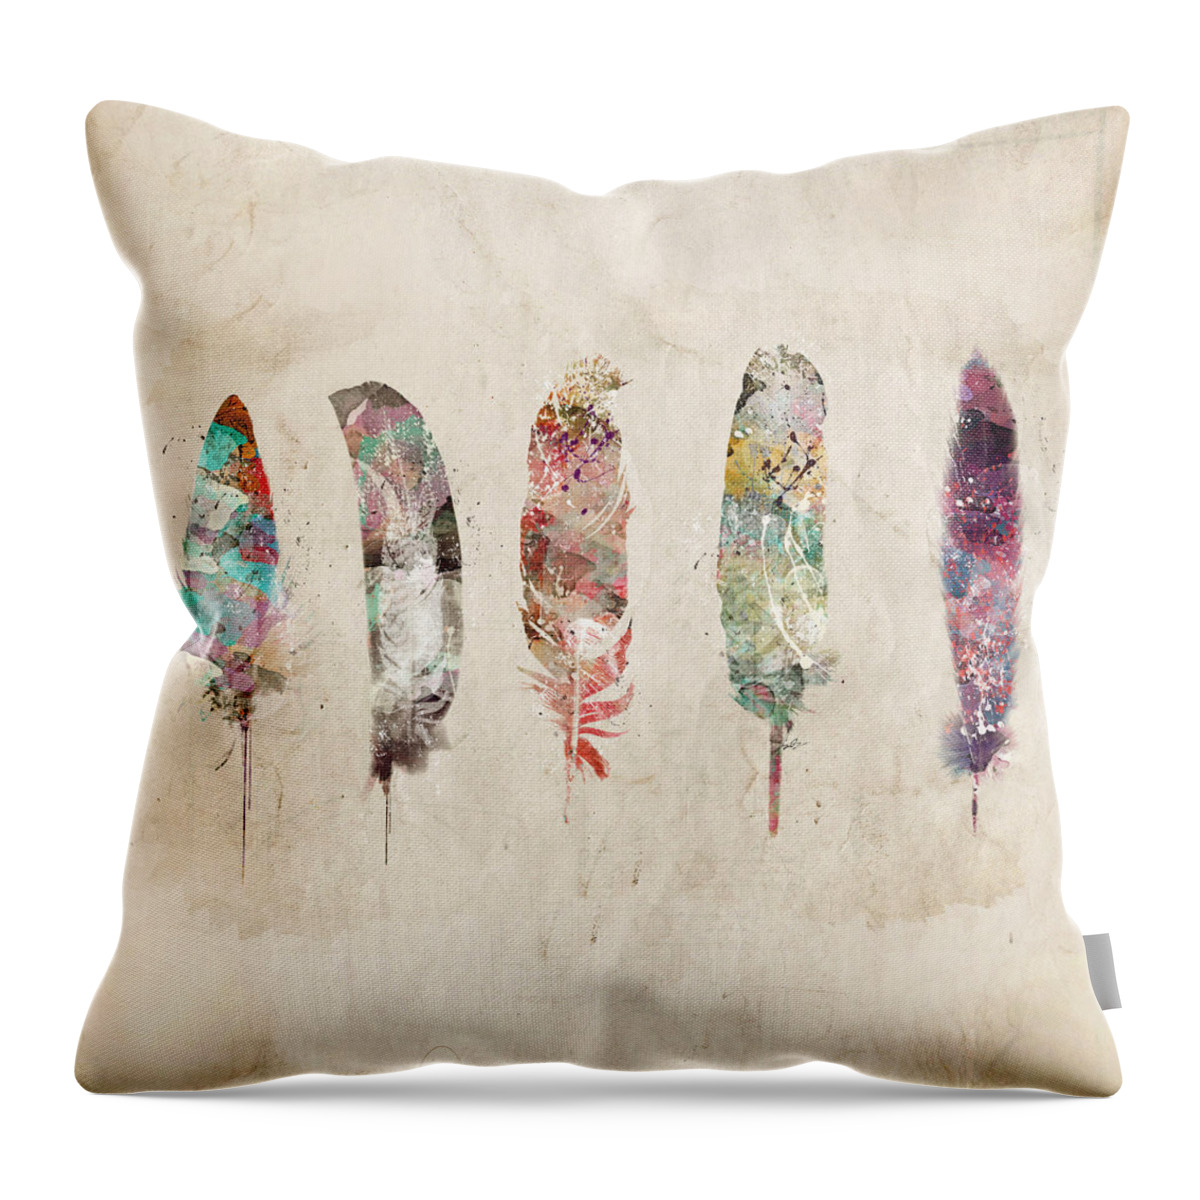 Feathers Throw Pillow featuring the painting Pop Art Feathers by Bri Buckley